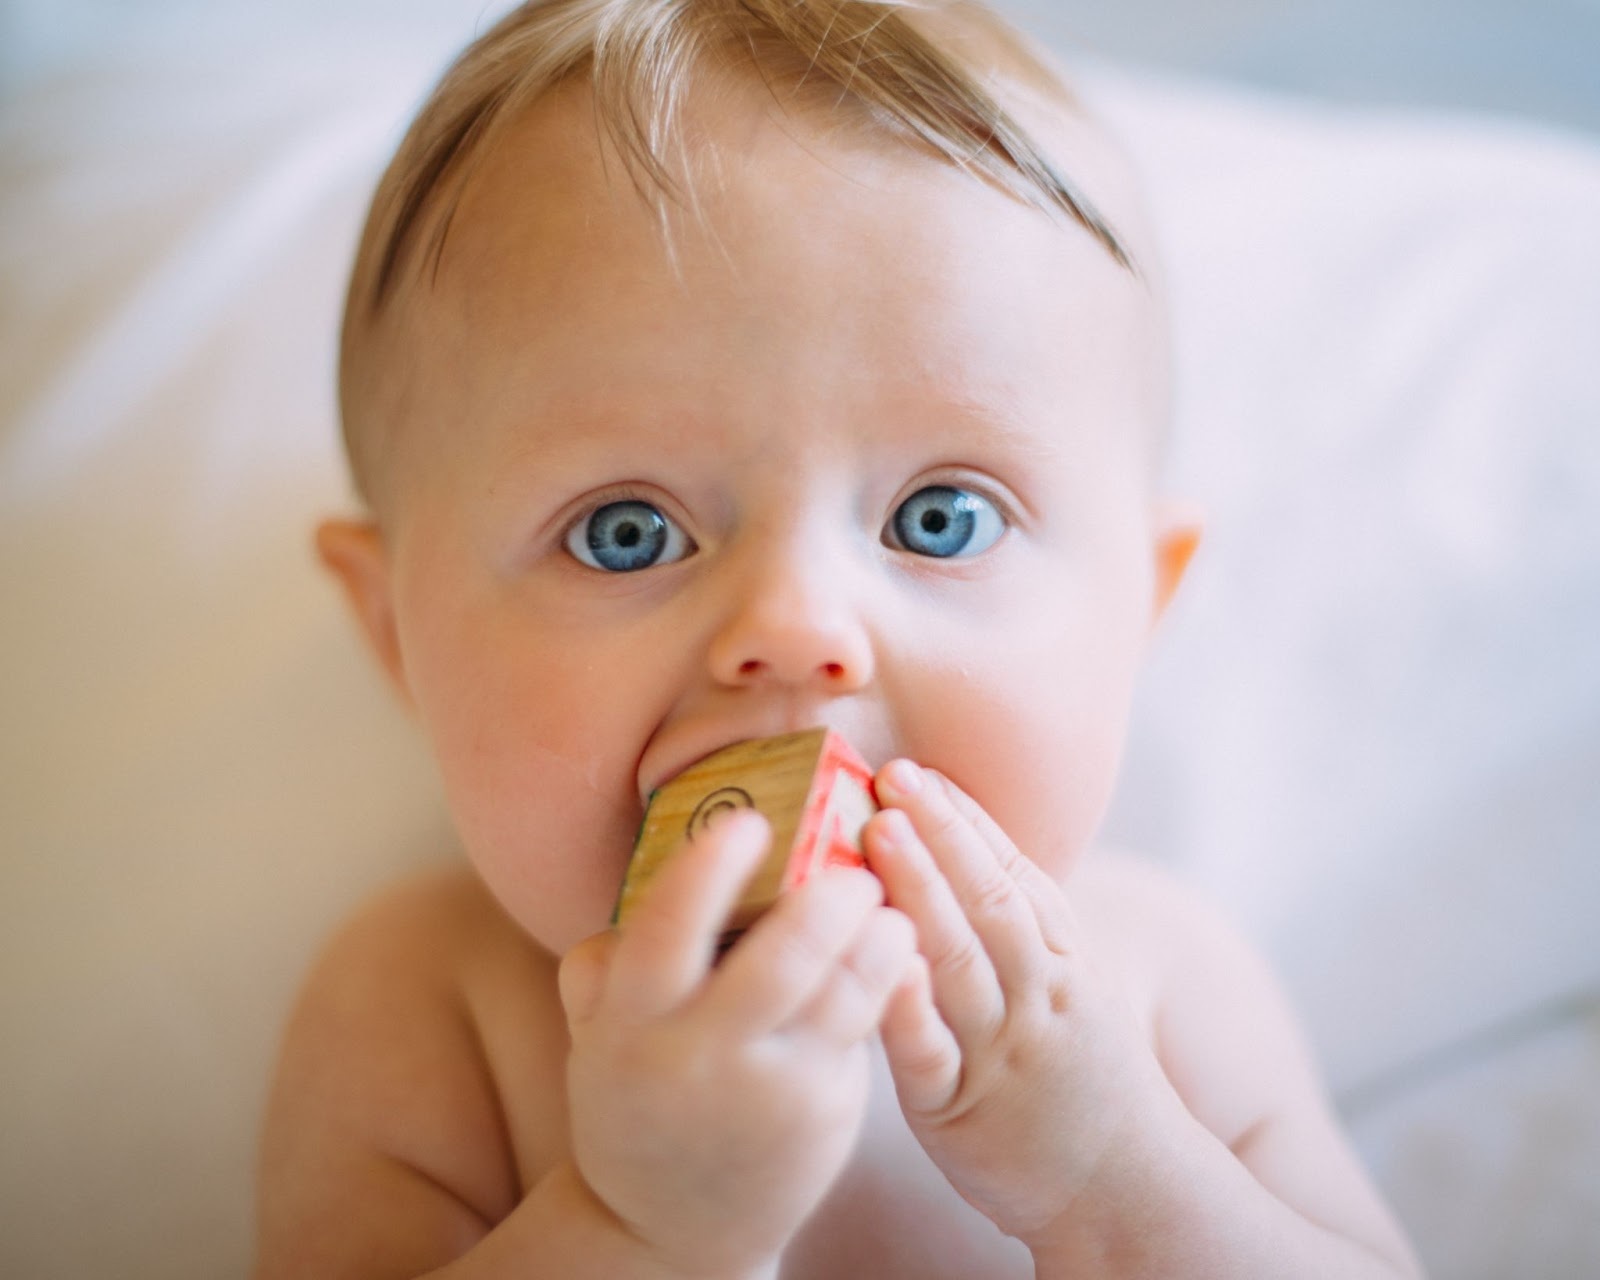 what are the signs of teething in babies